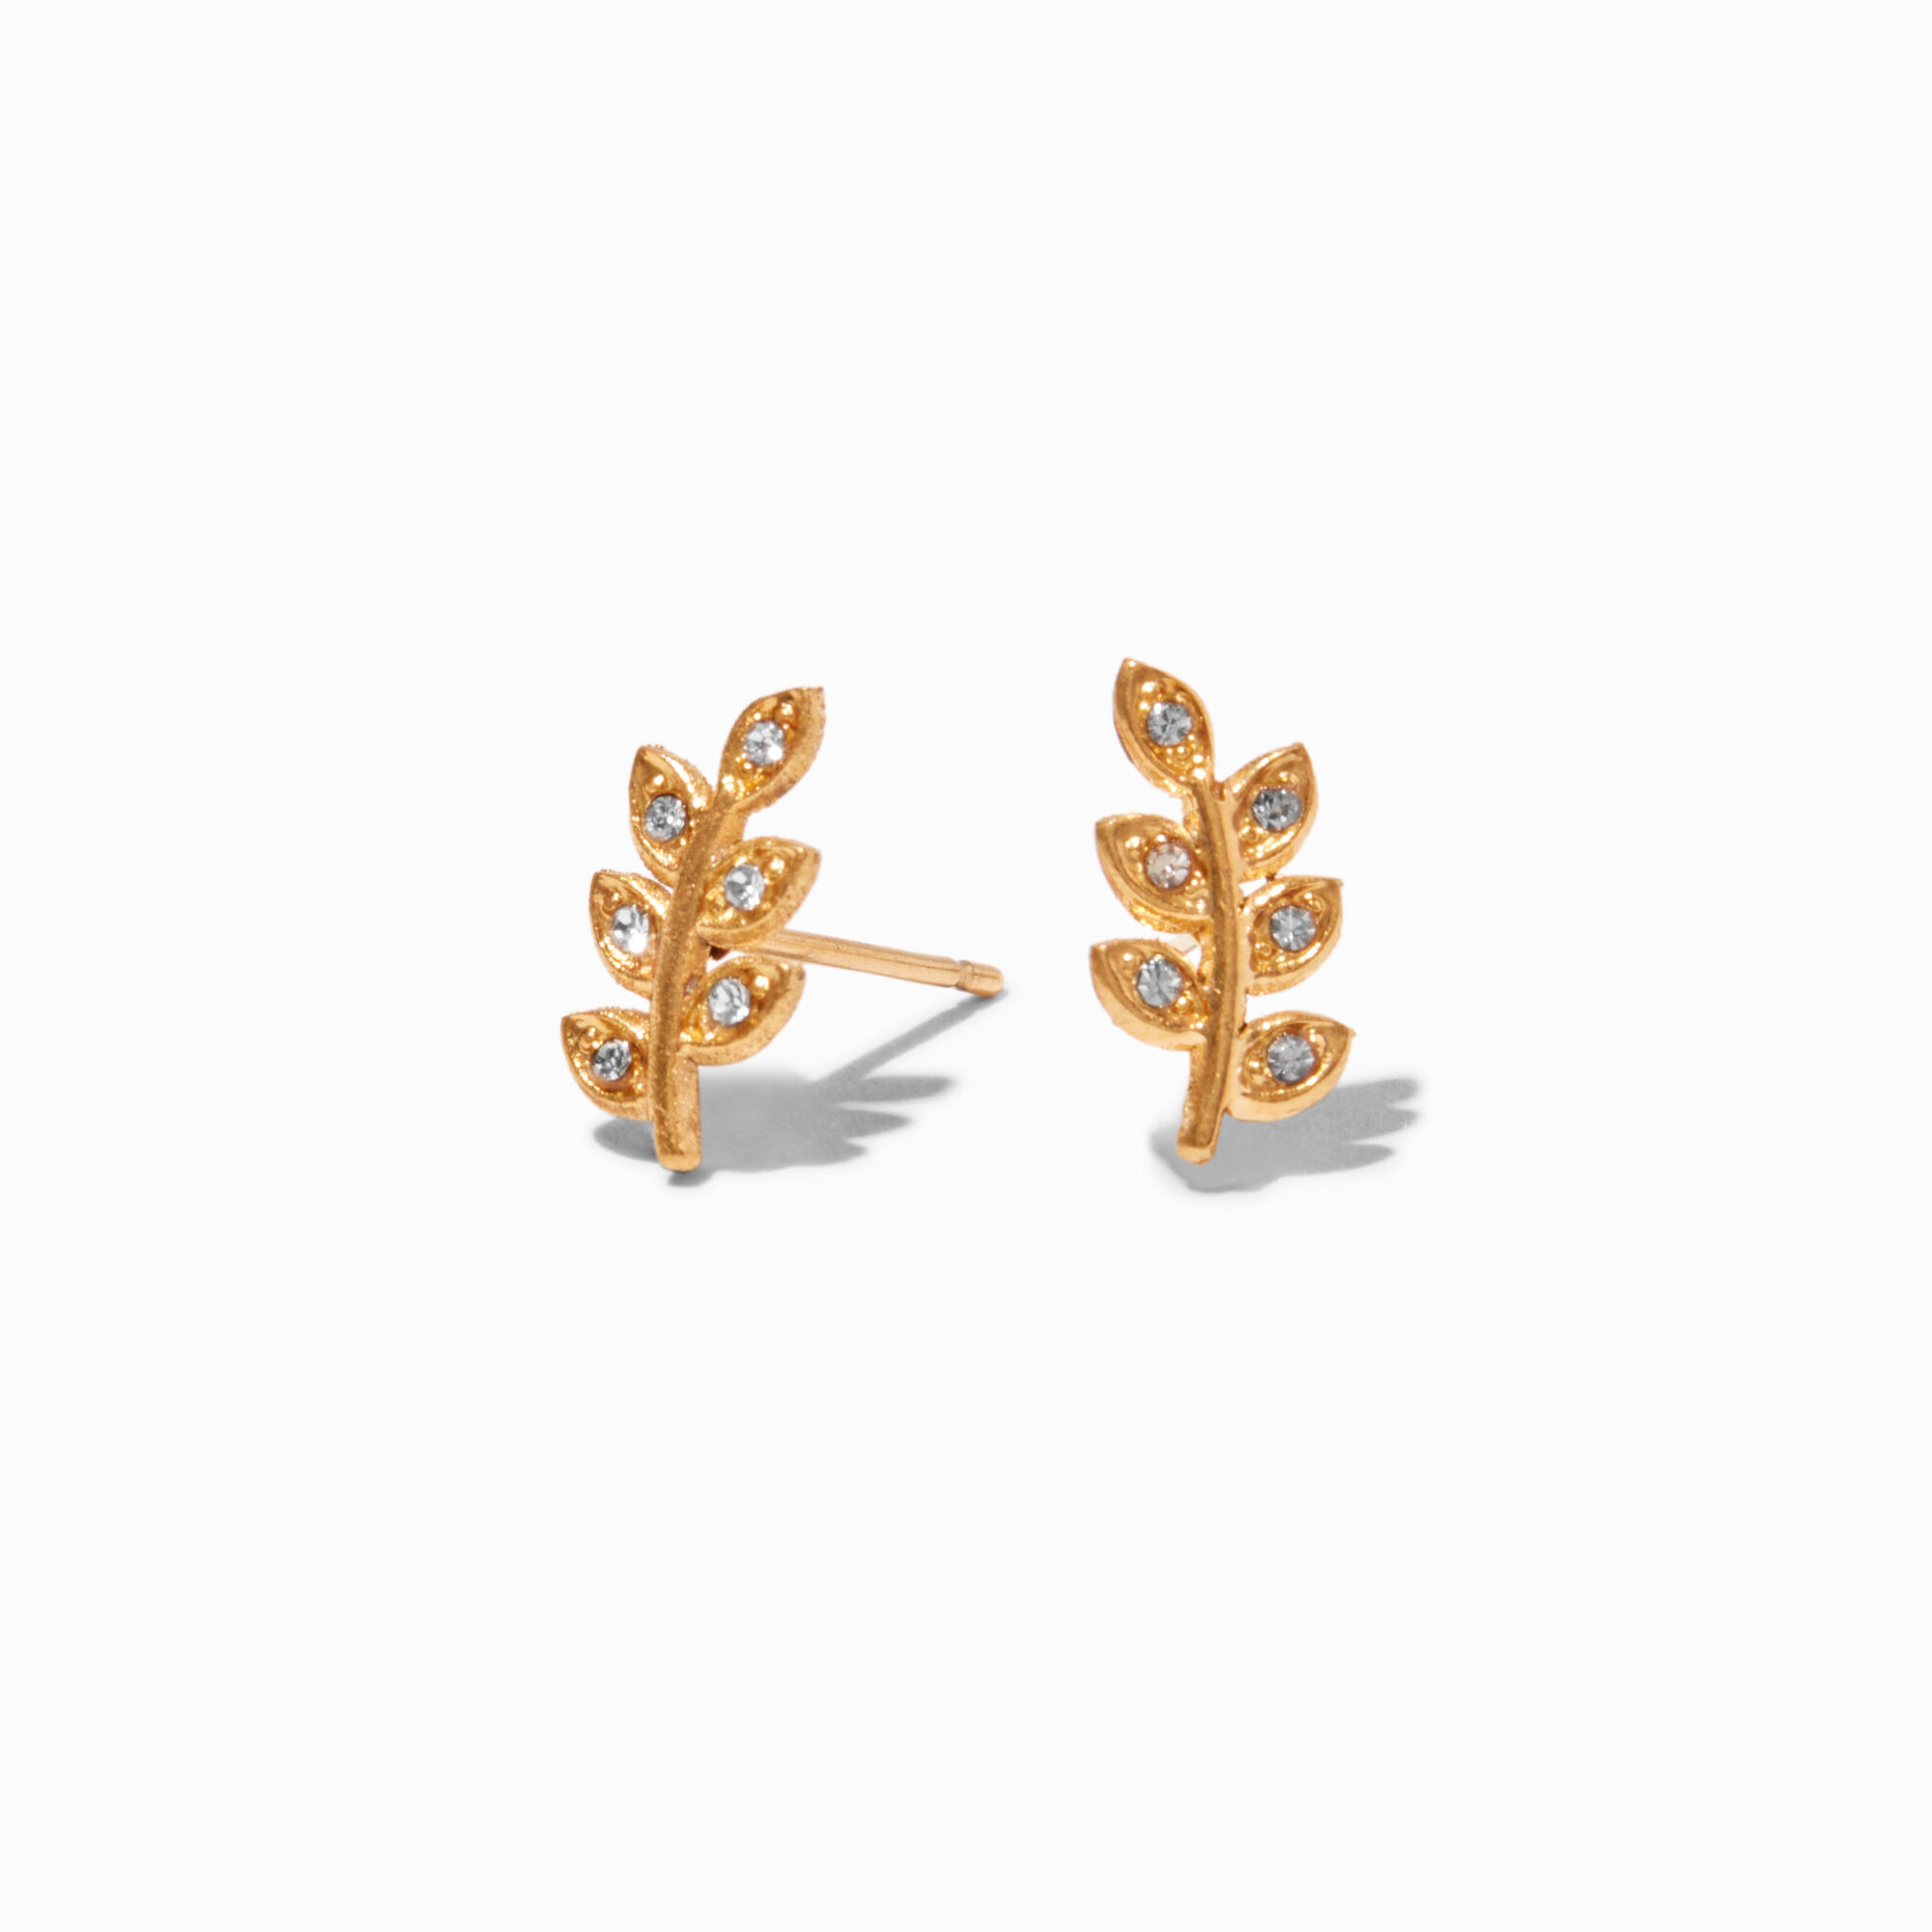 View Claires Titanium Crystal Leaf Stud Earrings Gold information